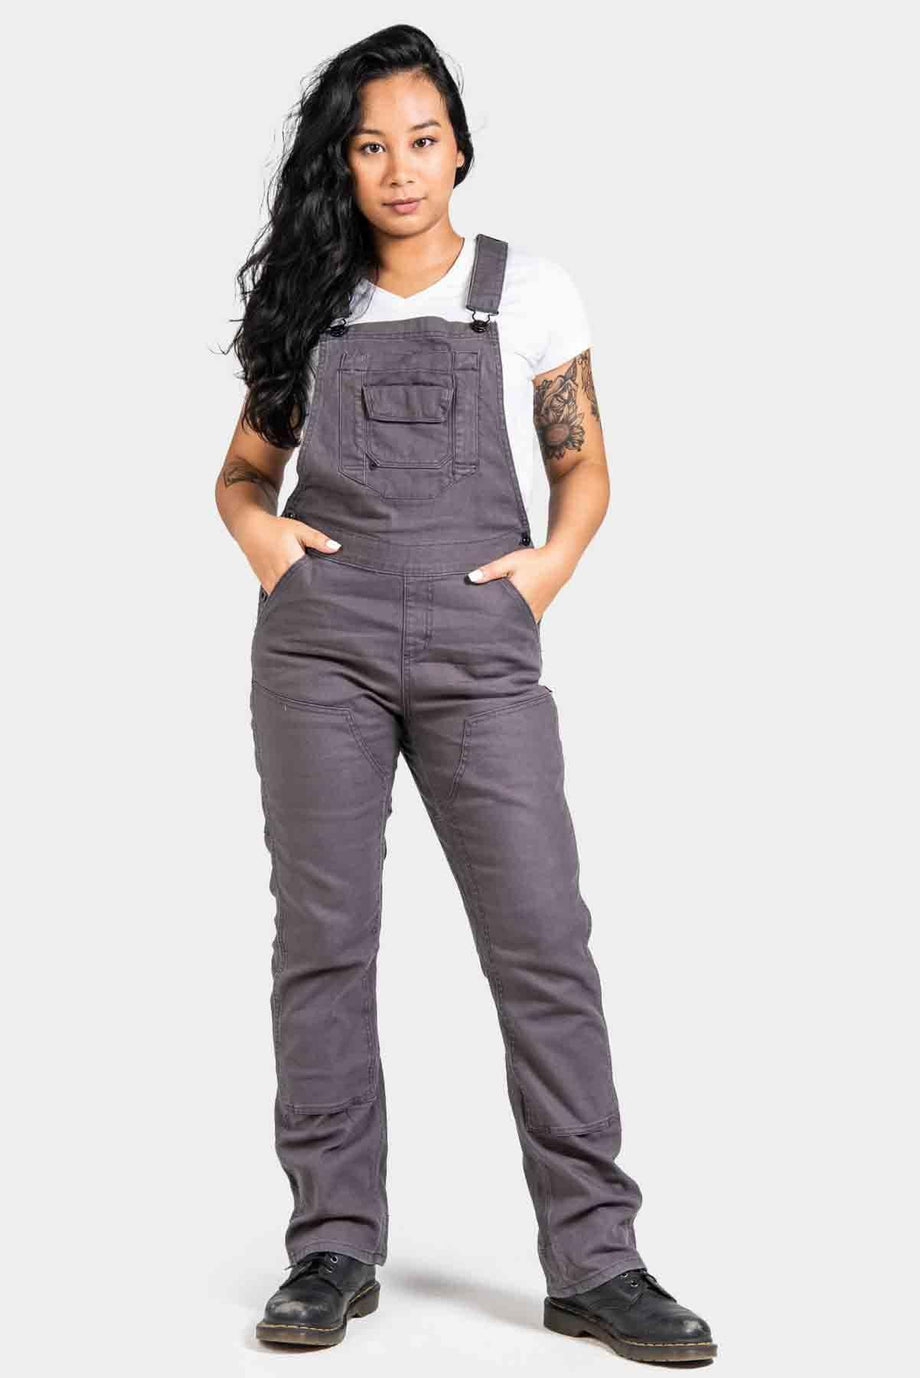 NEW Womens Jumpsuit Ladies Overalls All in One Boiler suit Sizes 8 10 12 14